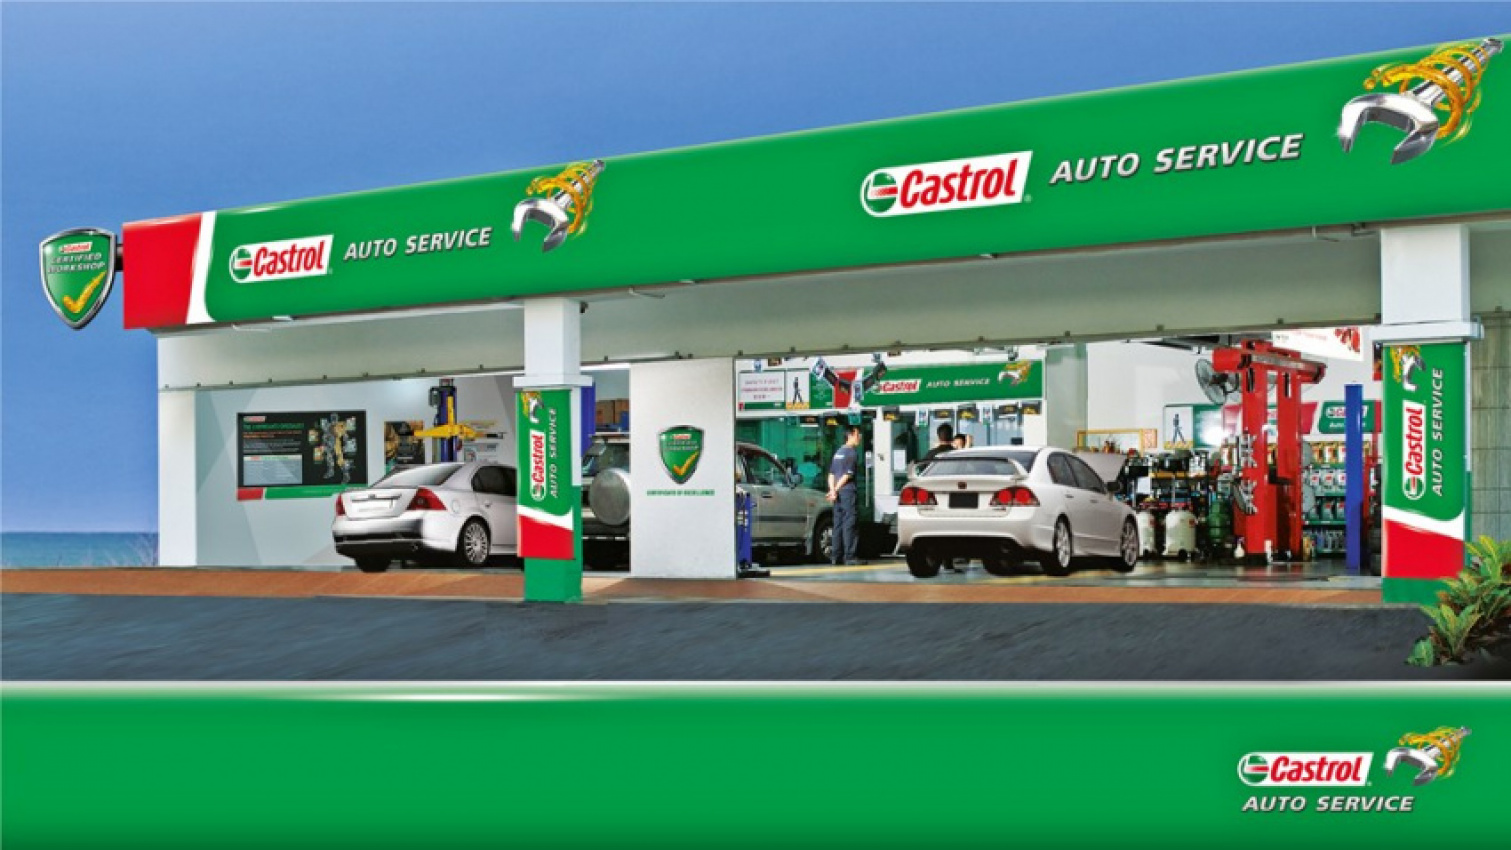 autos, cars, castrol auto service celebrates 20th anniversary in malaysia with special offer for customers